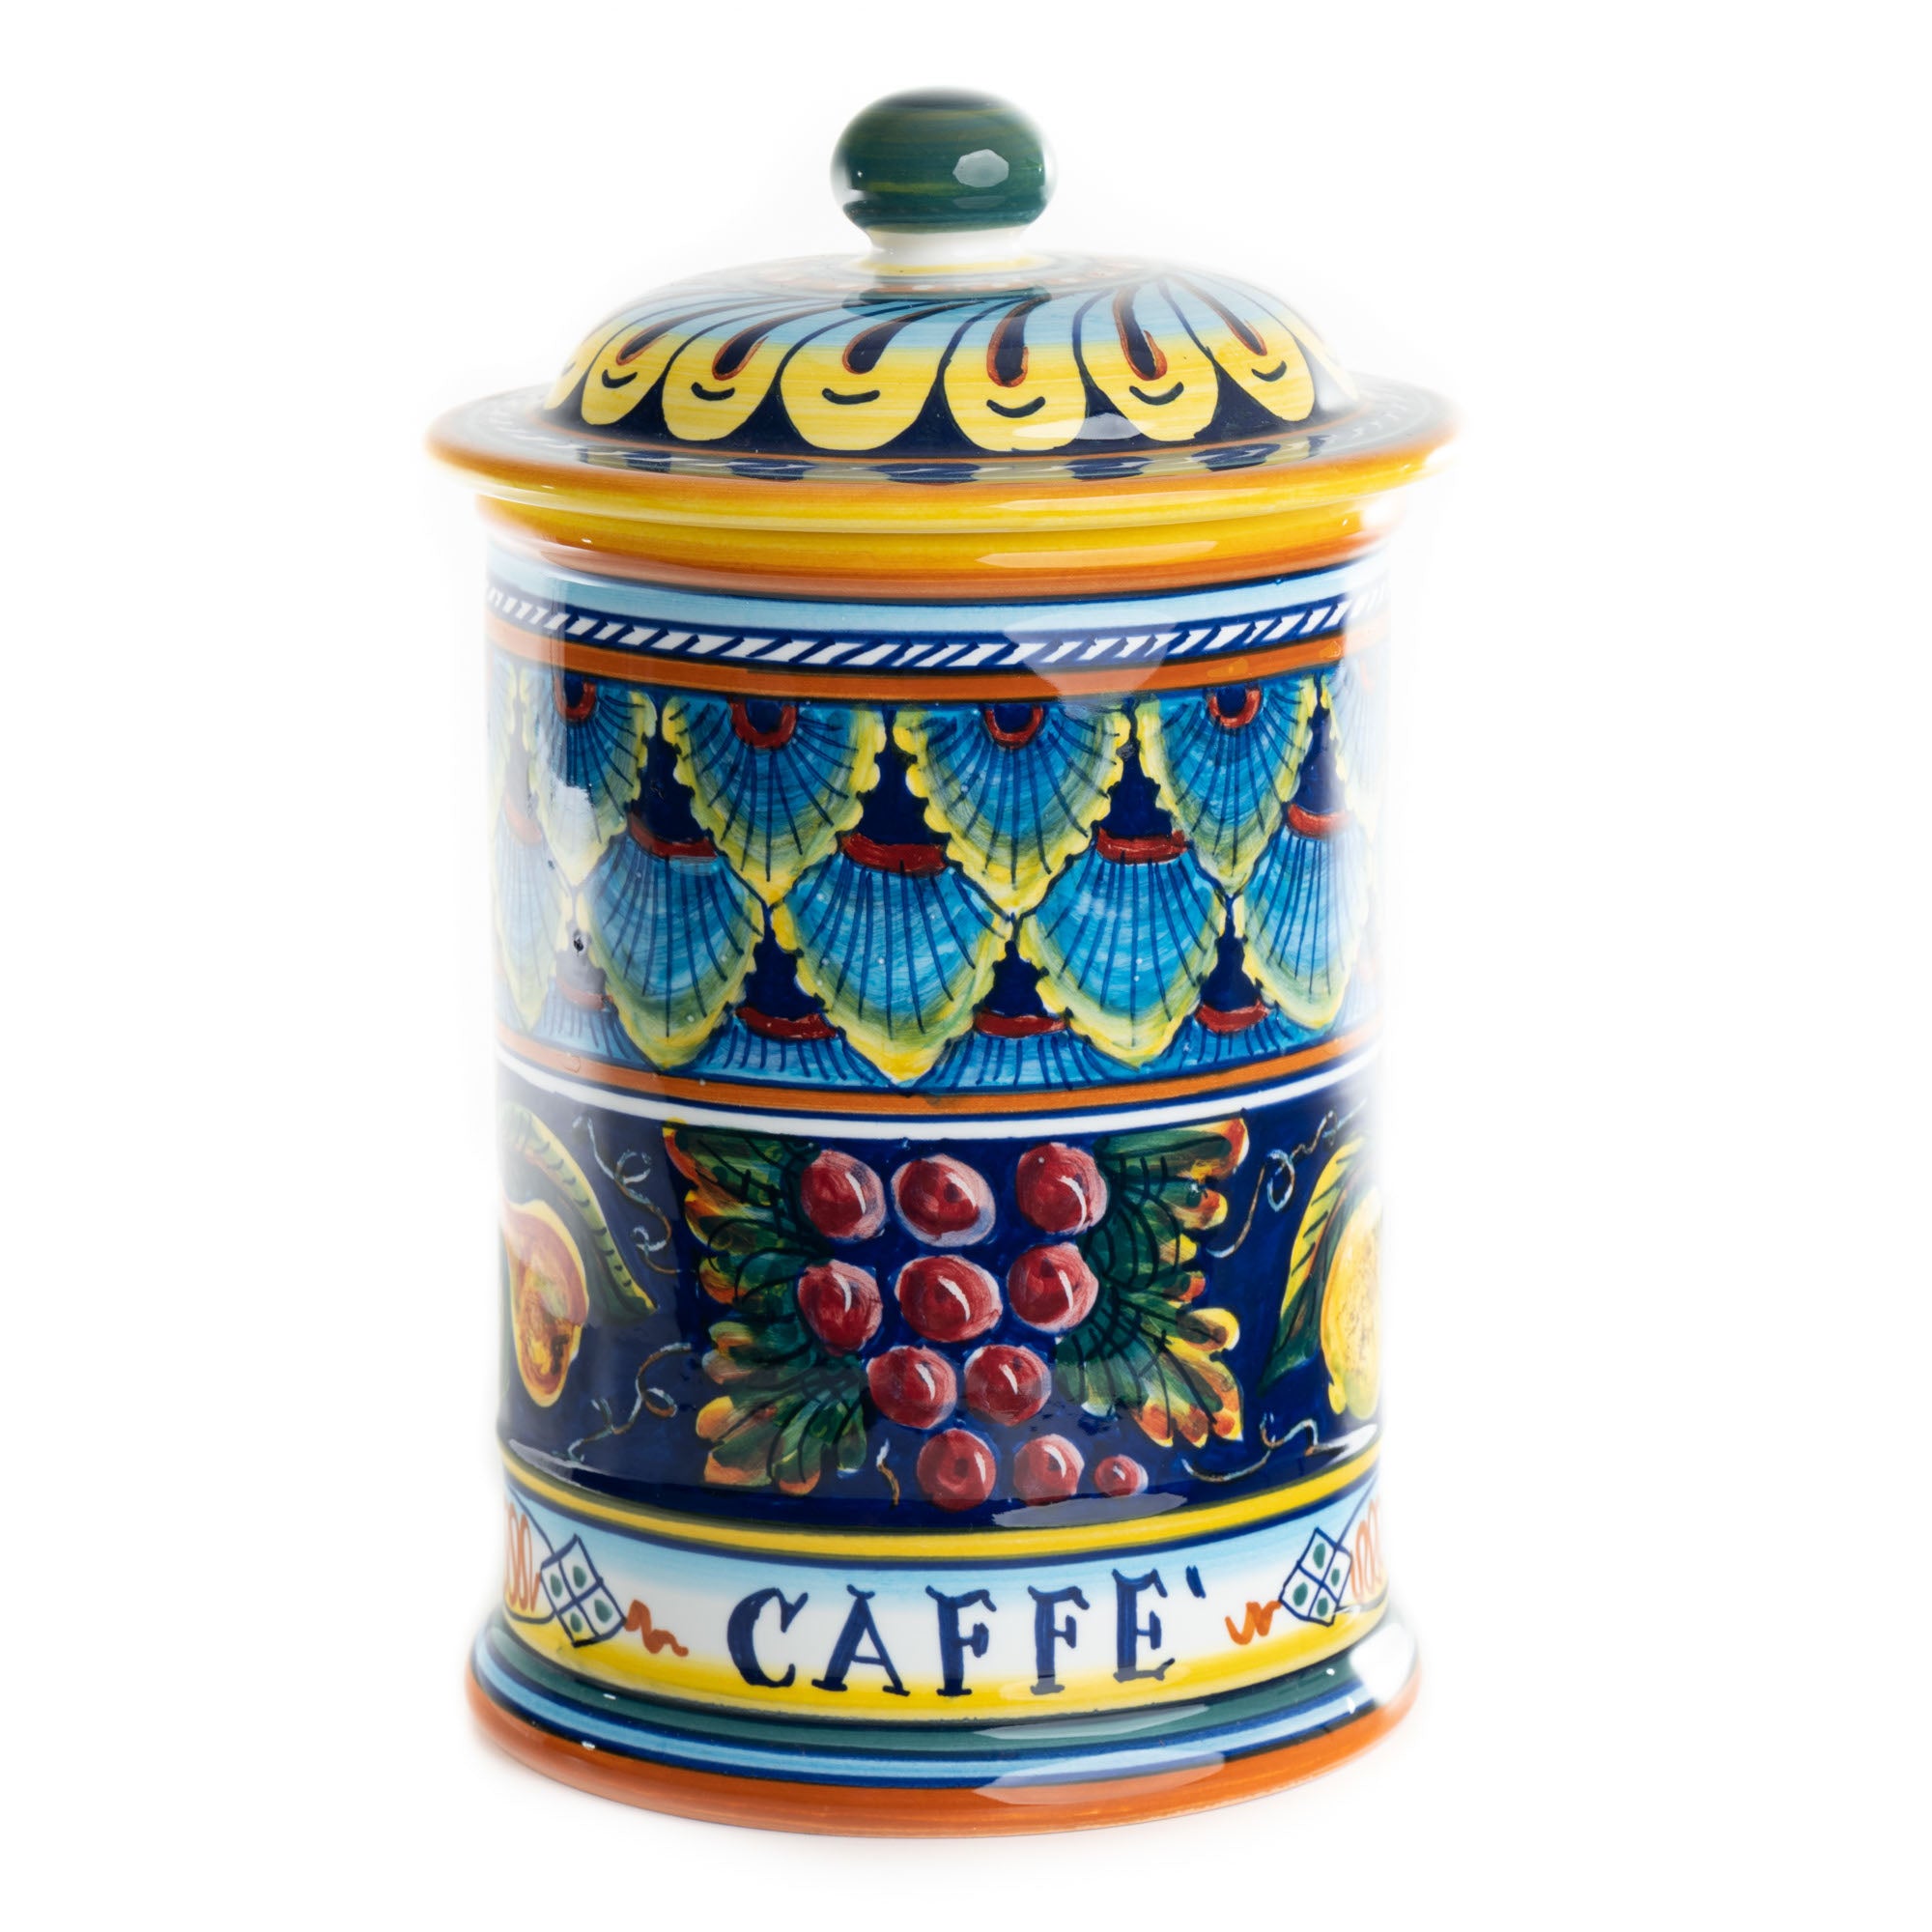 Collectible Majolica Caffe Canister B-57, ceramics, pottery, italian design, majolica, handmade, handcrafted, handpainted, home decor, kitchen art, home goods, deruta, majolica, Artisan, treasures, traditional art, modern art, gift ideas, style, SF, shop small business, artists, shop online, landmark store, legacy, one of a kind, limited edition, gift guide, gift shop, retail shop, decorations, shopping, italy, home staging, home decorating, home interiors